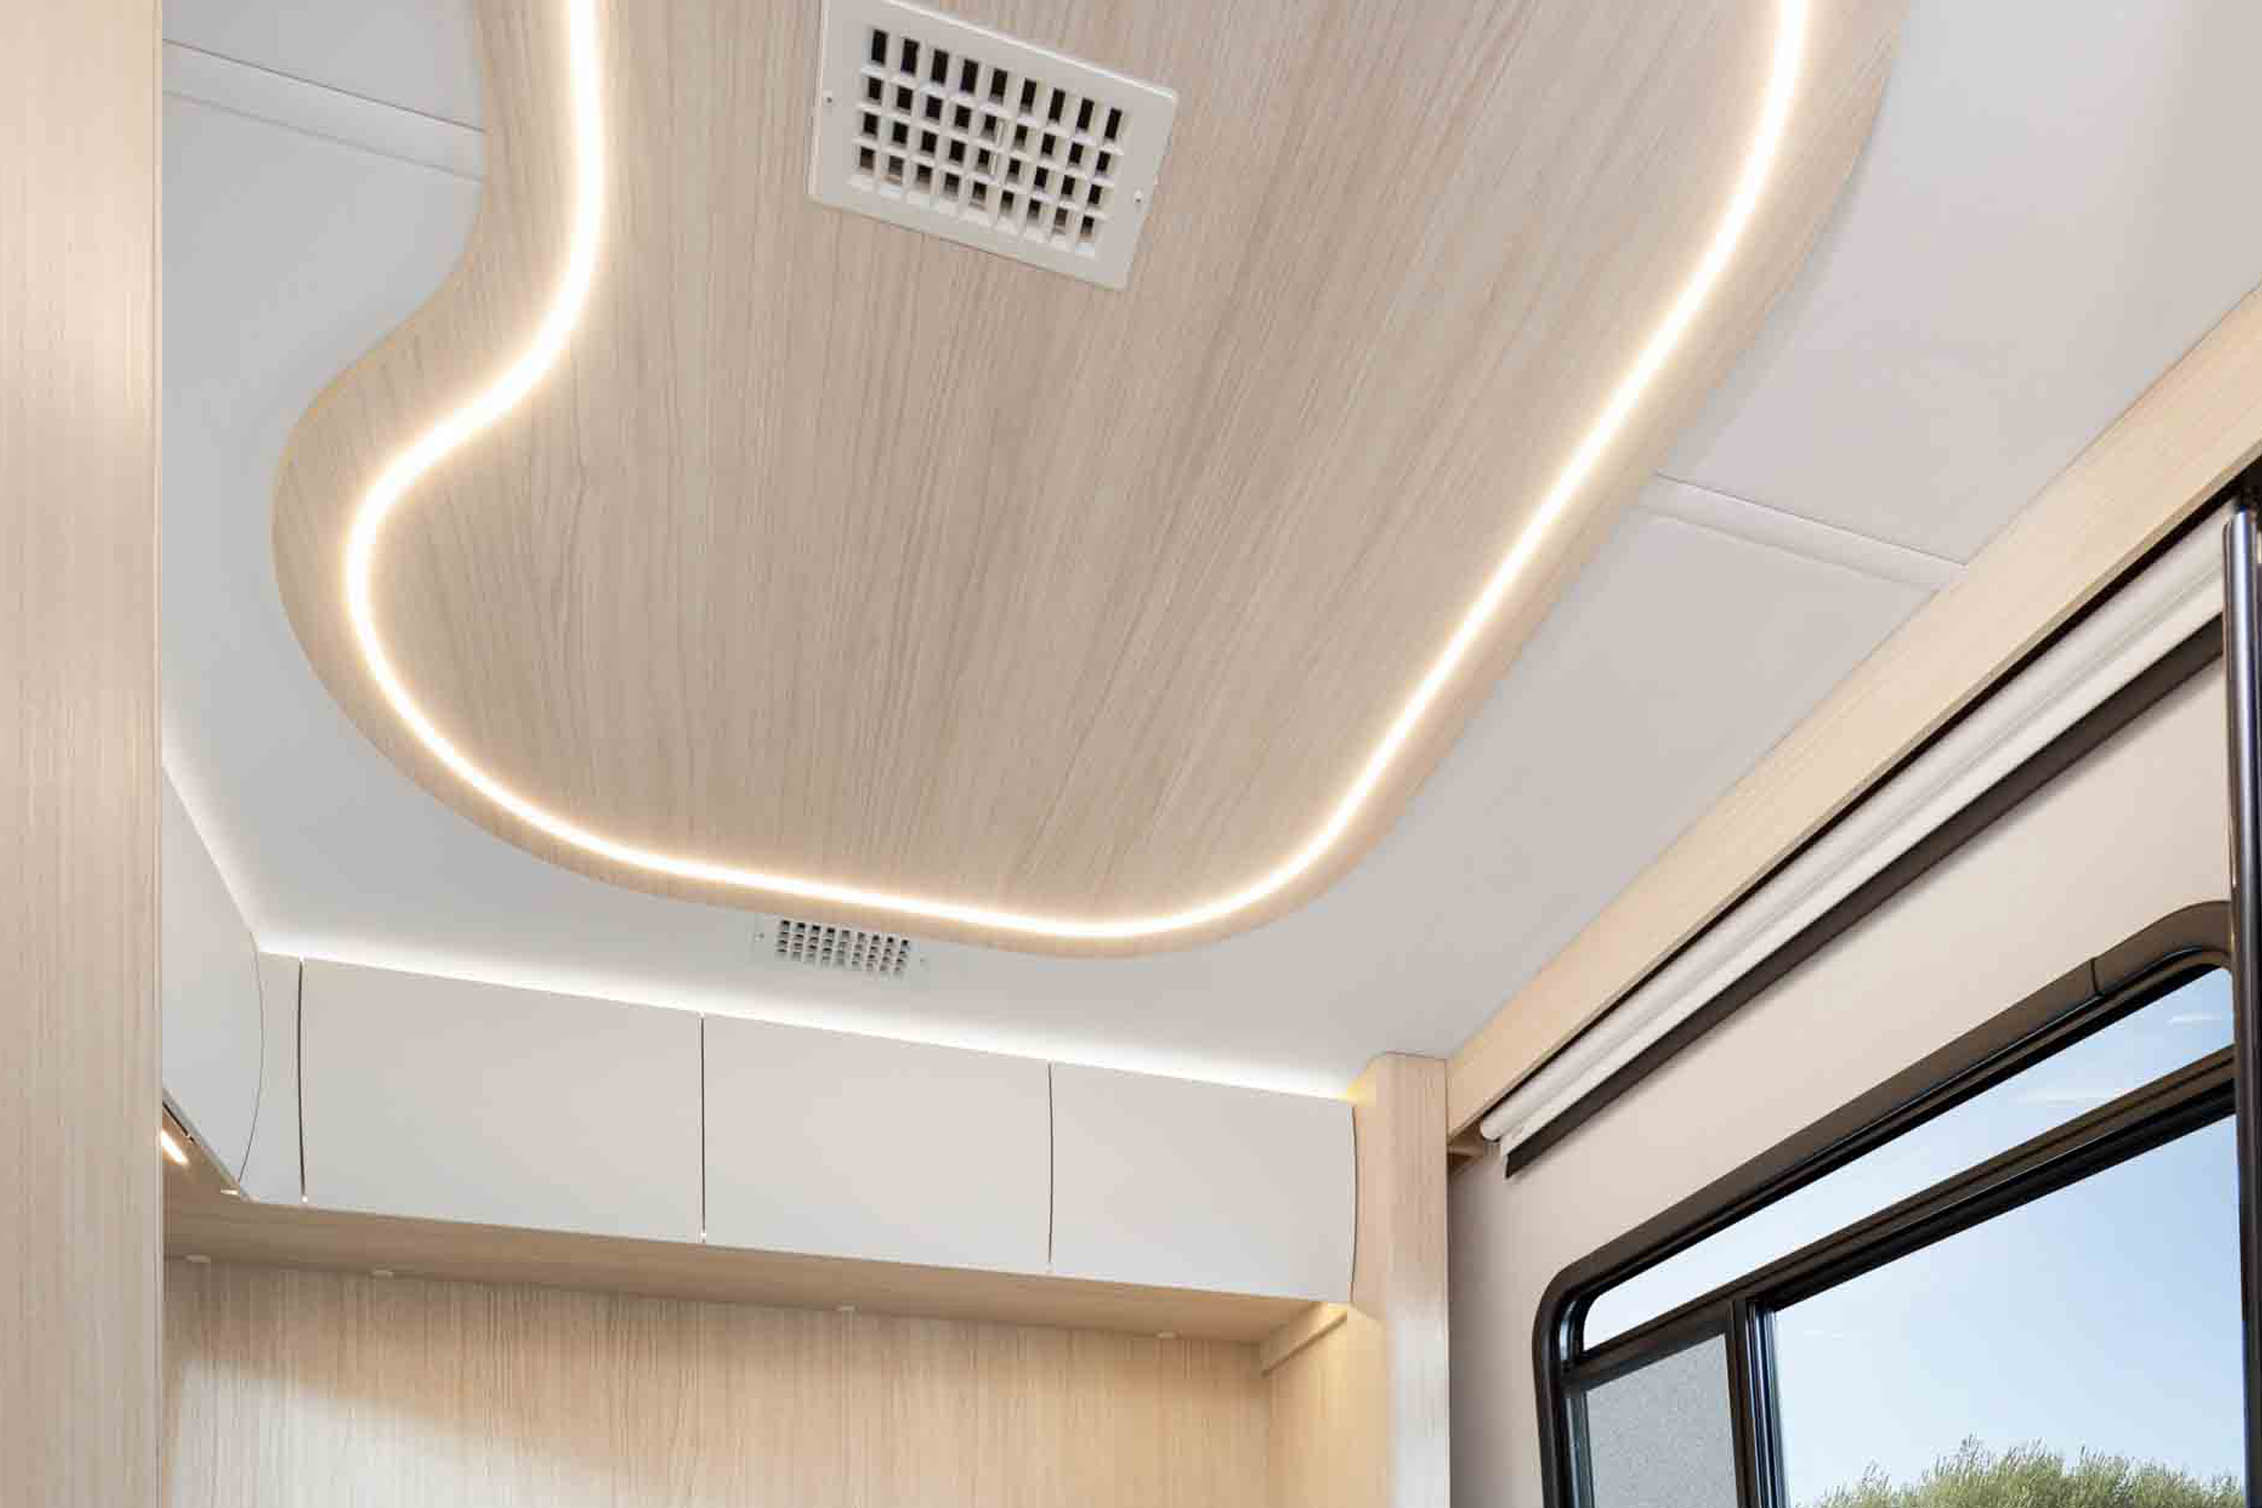 Ducted air conditioning in the ceiling